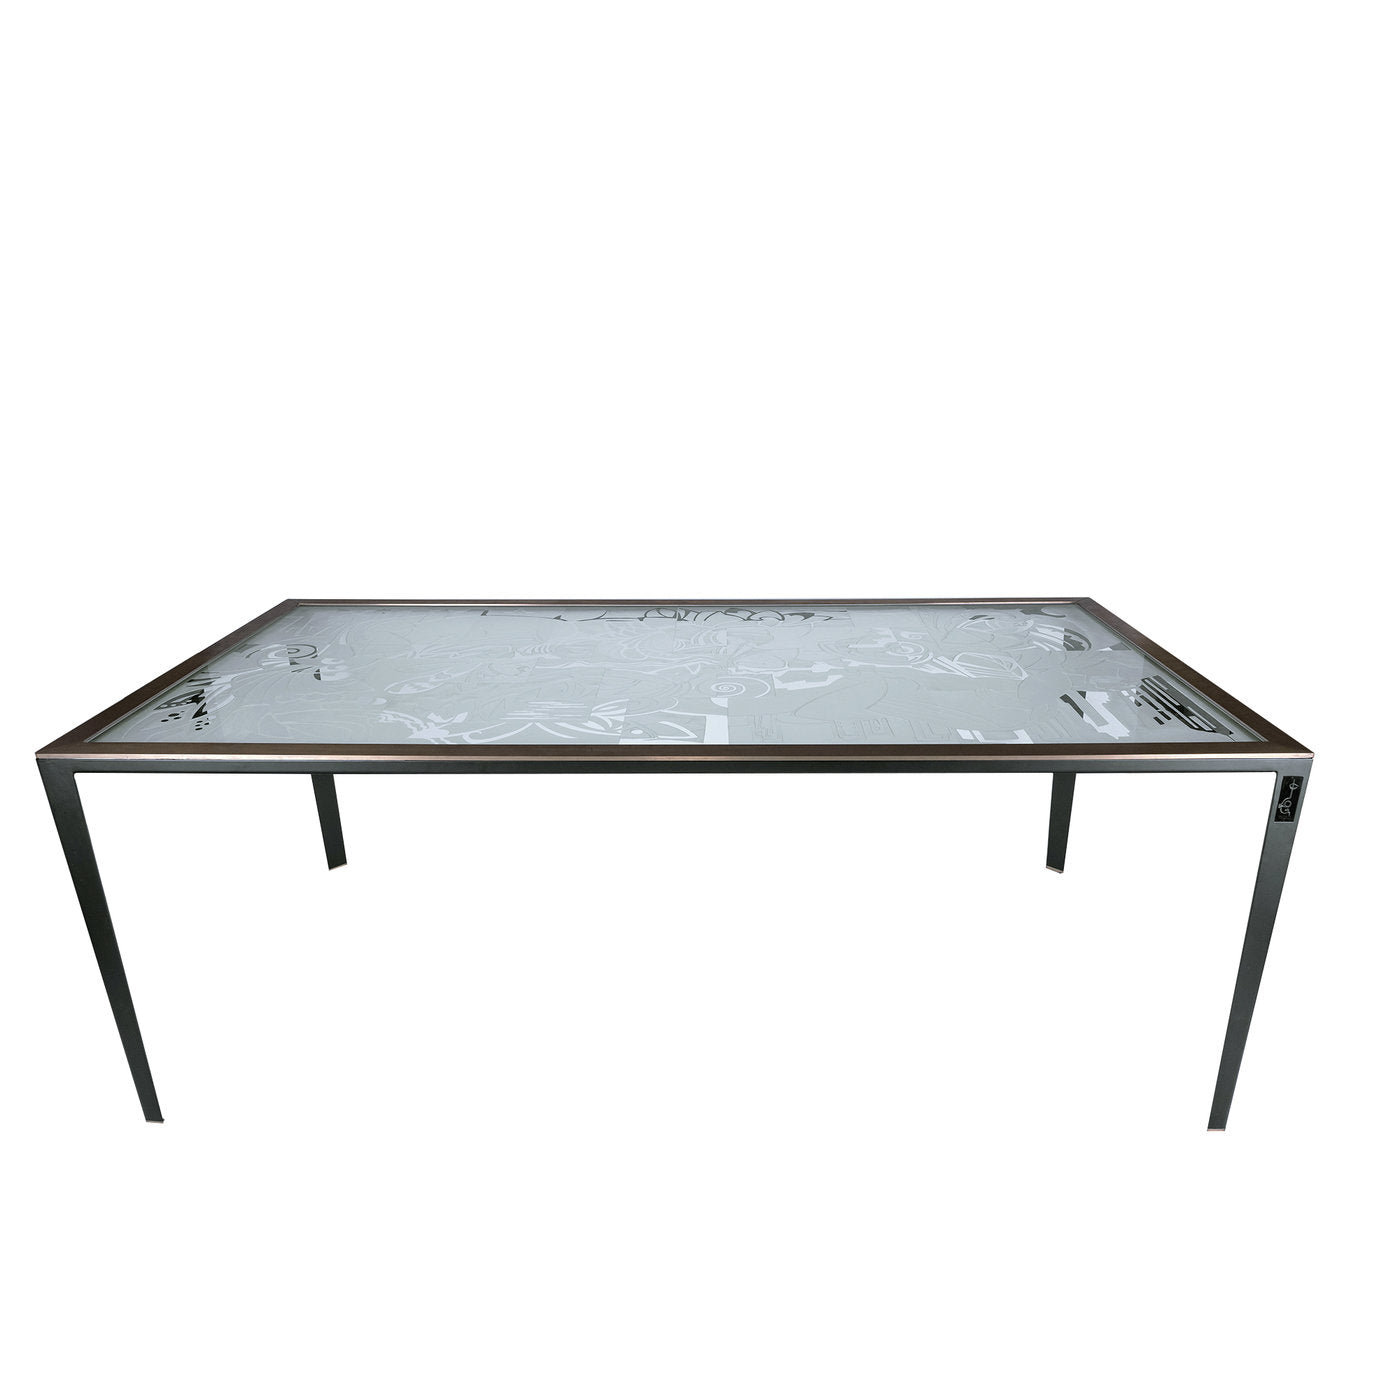 Iron and Glass Black Table - Alternative view 1